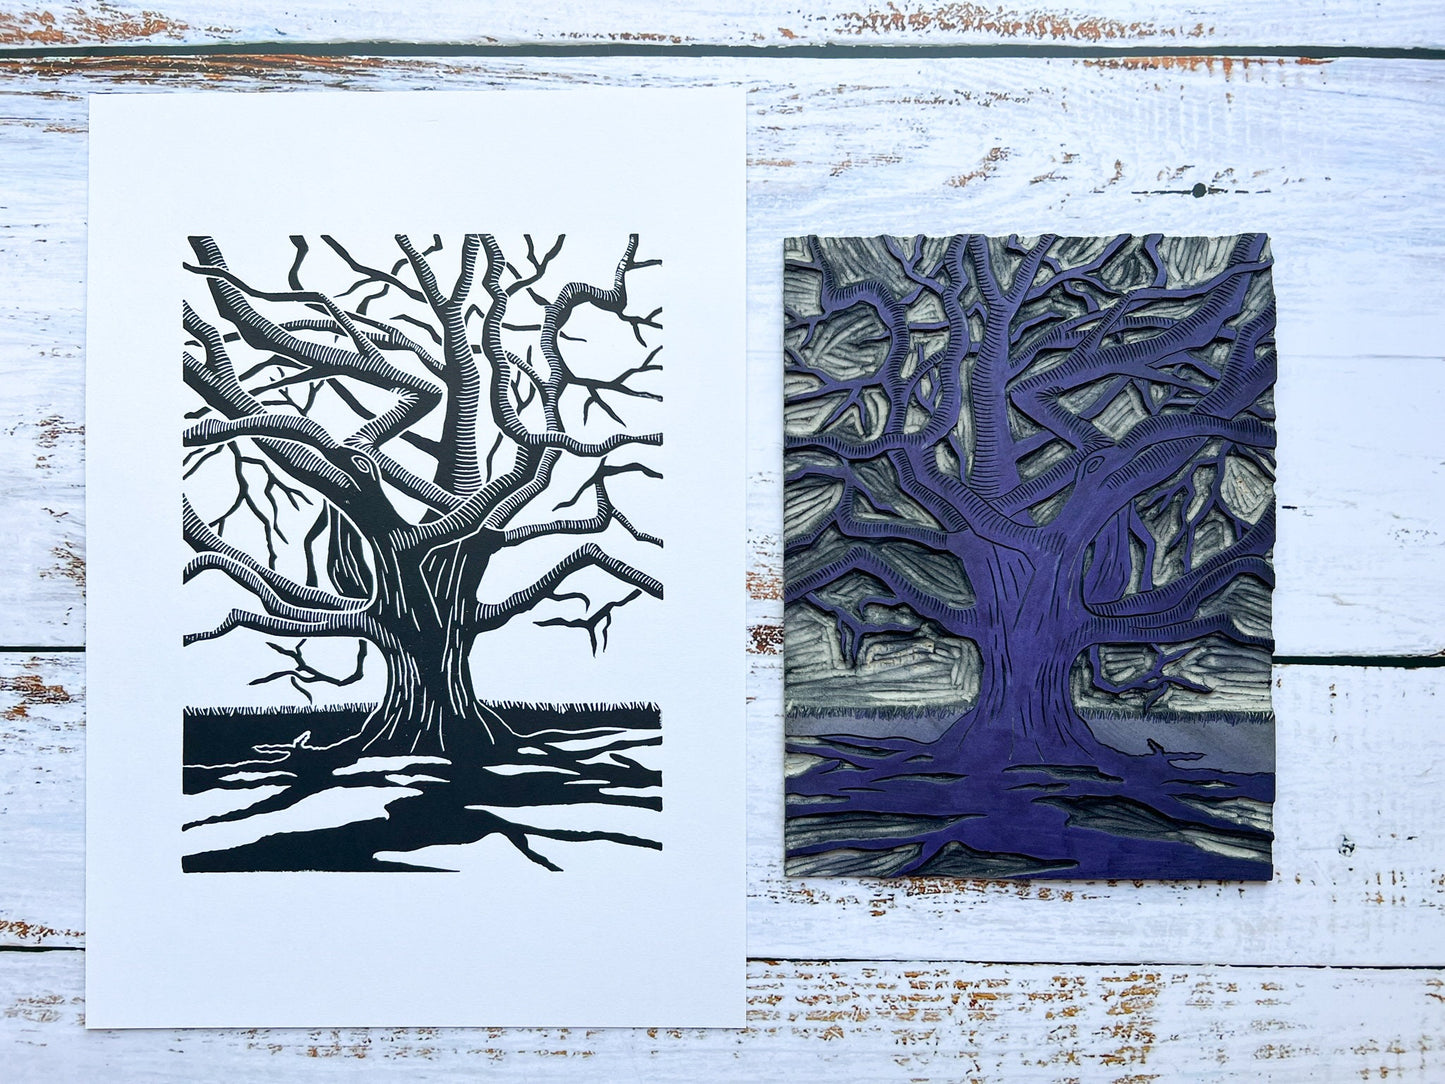 A lino print of a gnarly oak tree with dramatic shadows next to the carved lino block